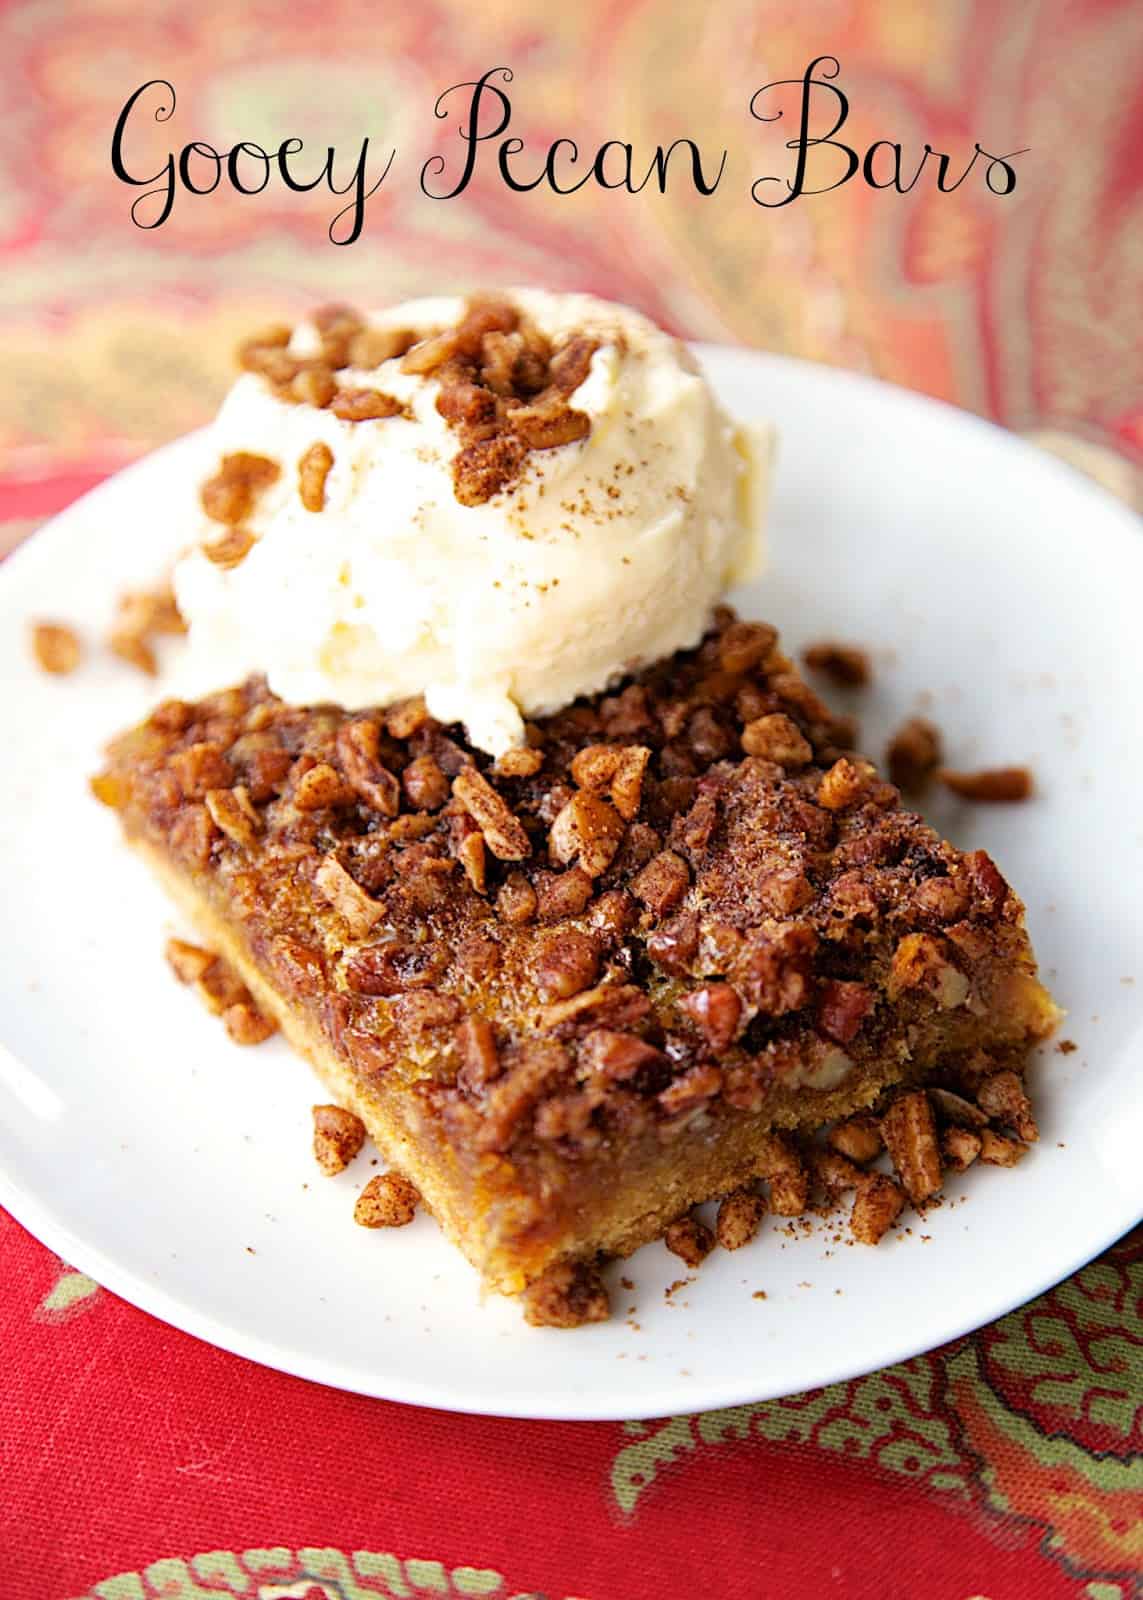 Gooey Pecan Bars - cake mix crust topped with yummy pecan pie filling. Serve warm with ice cream! Perfect for holiday meals! Everyone RAVES about this easy dessert recipe!